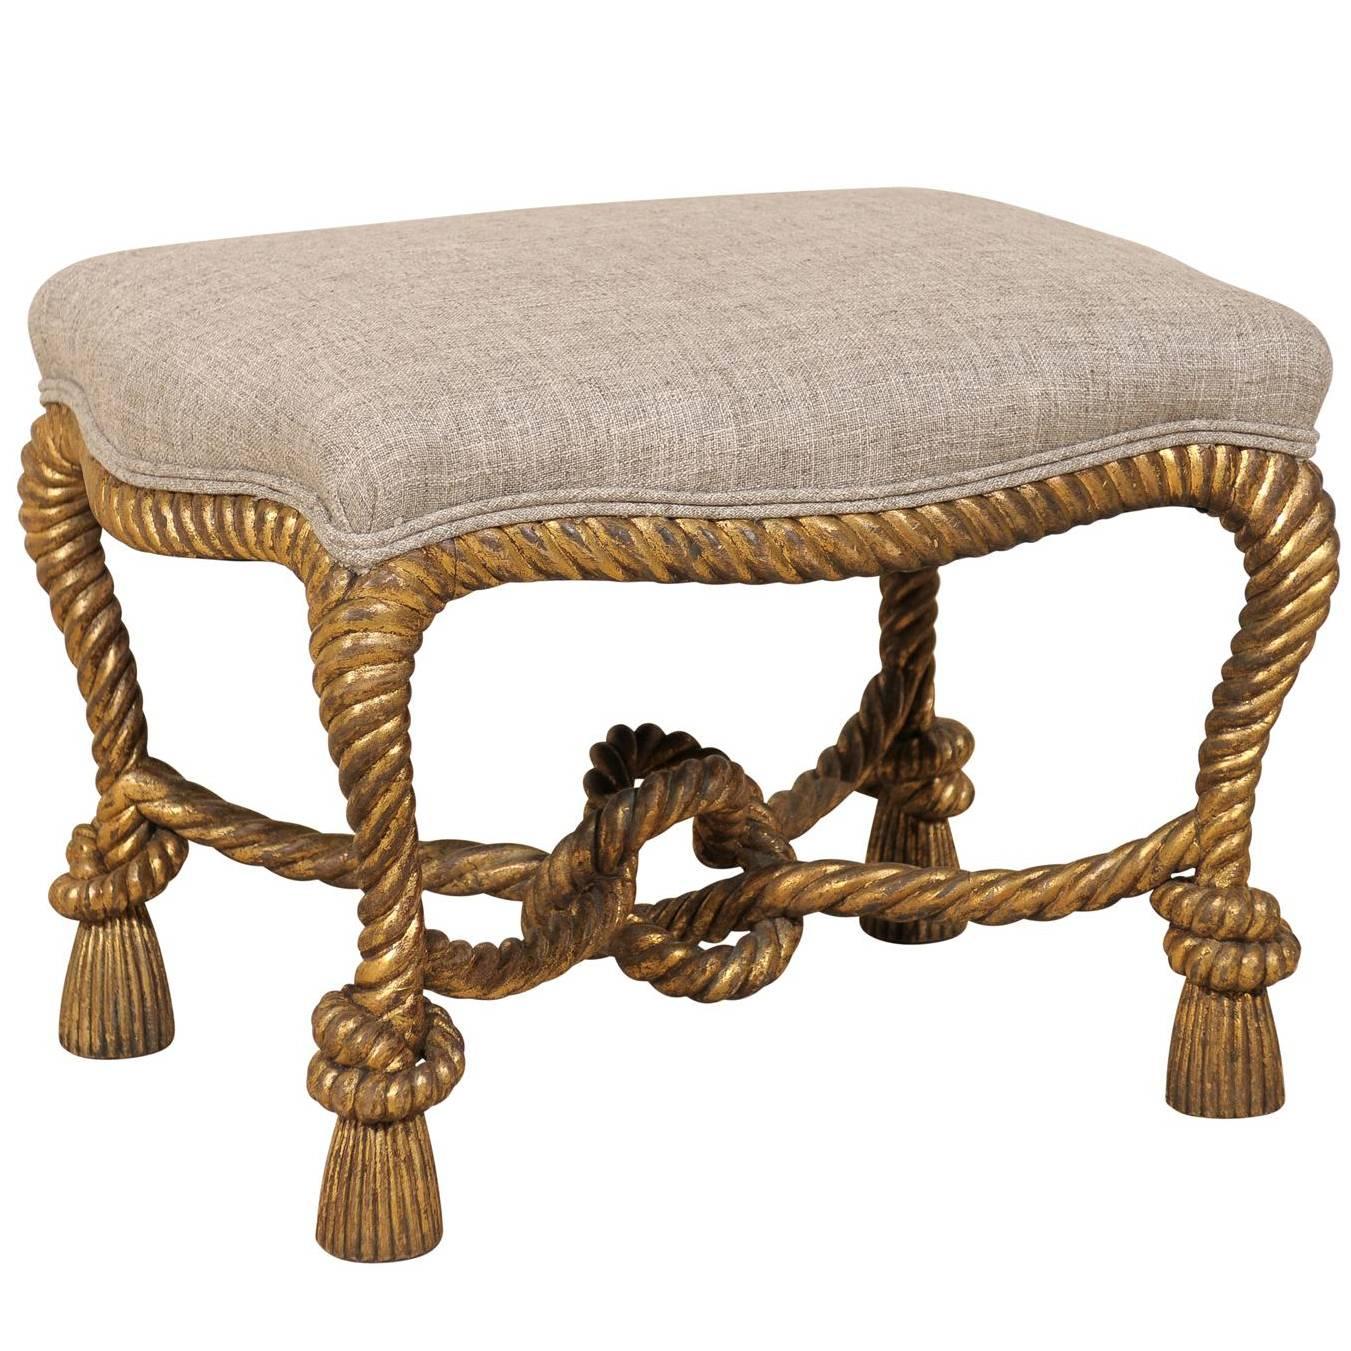 Italian Carved and Gilded Rope and Tassel Wooden Stool